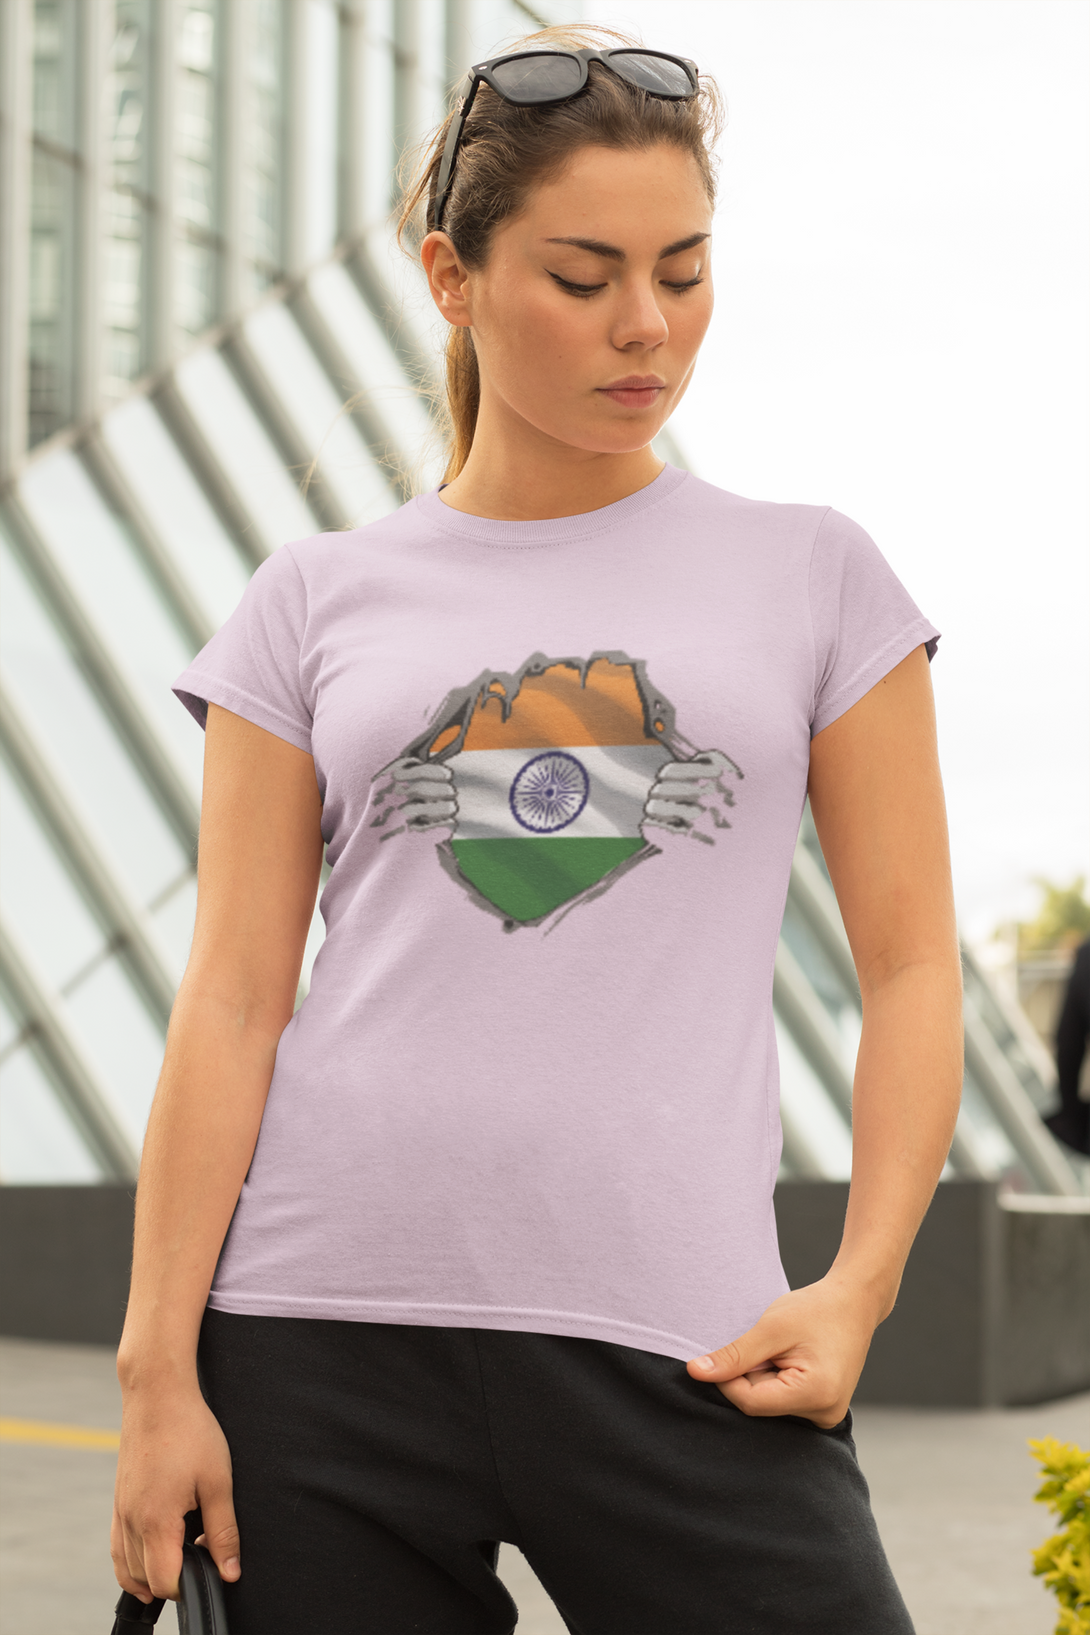 Patriotic Explosion Printed T-Shirt For Women - WowWaves - 6